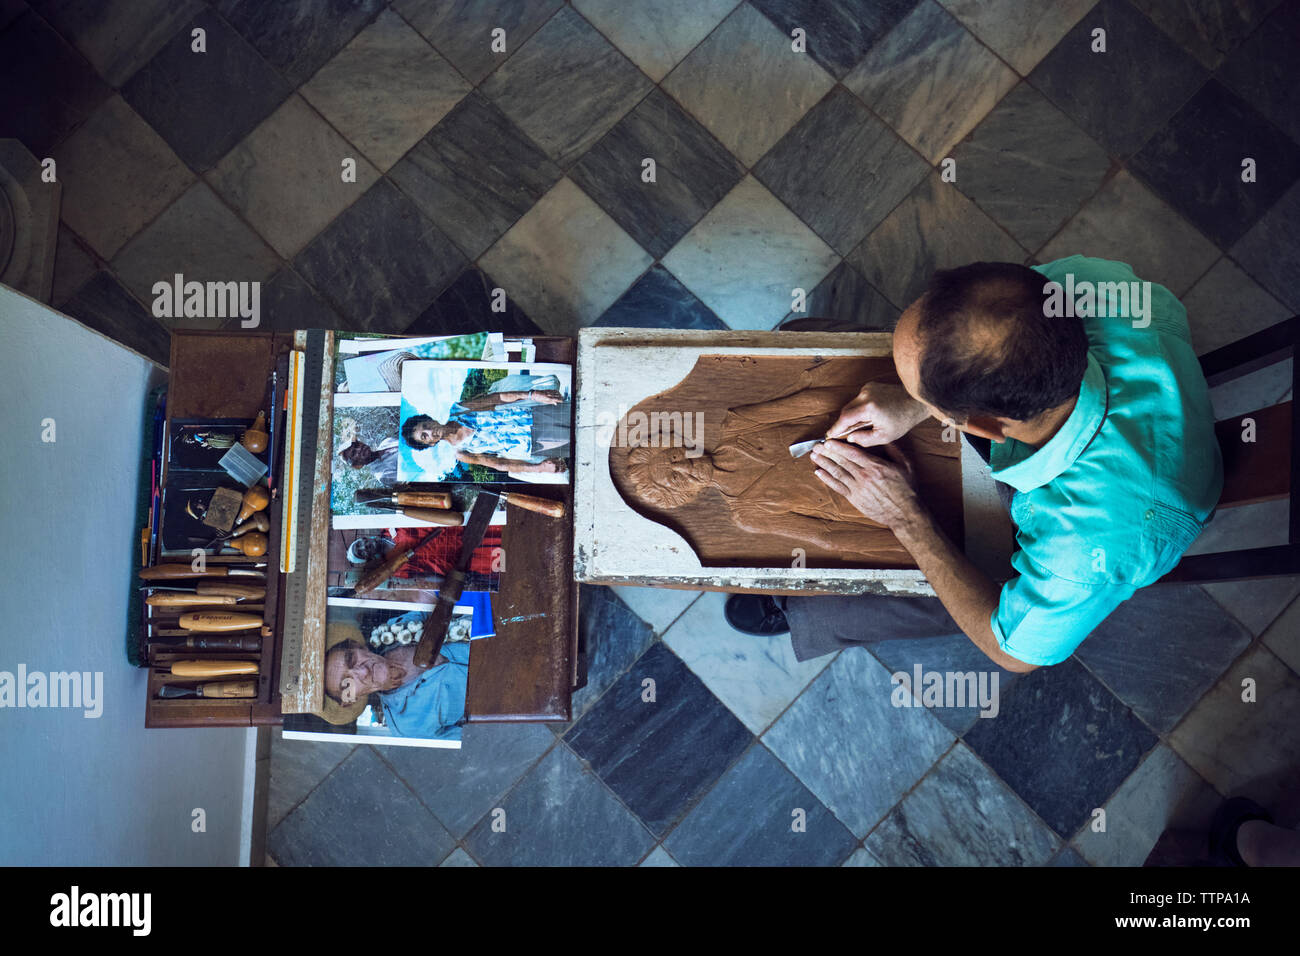 Overhead view of man carving while sitting in workshop Stock Photo